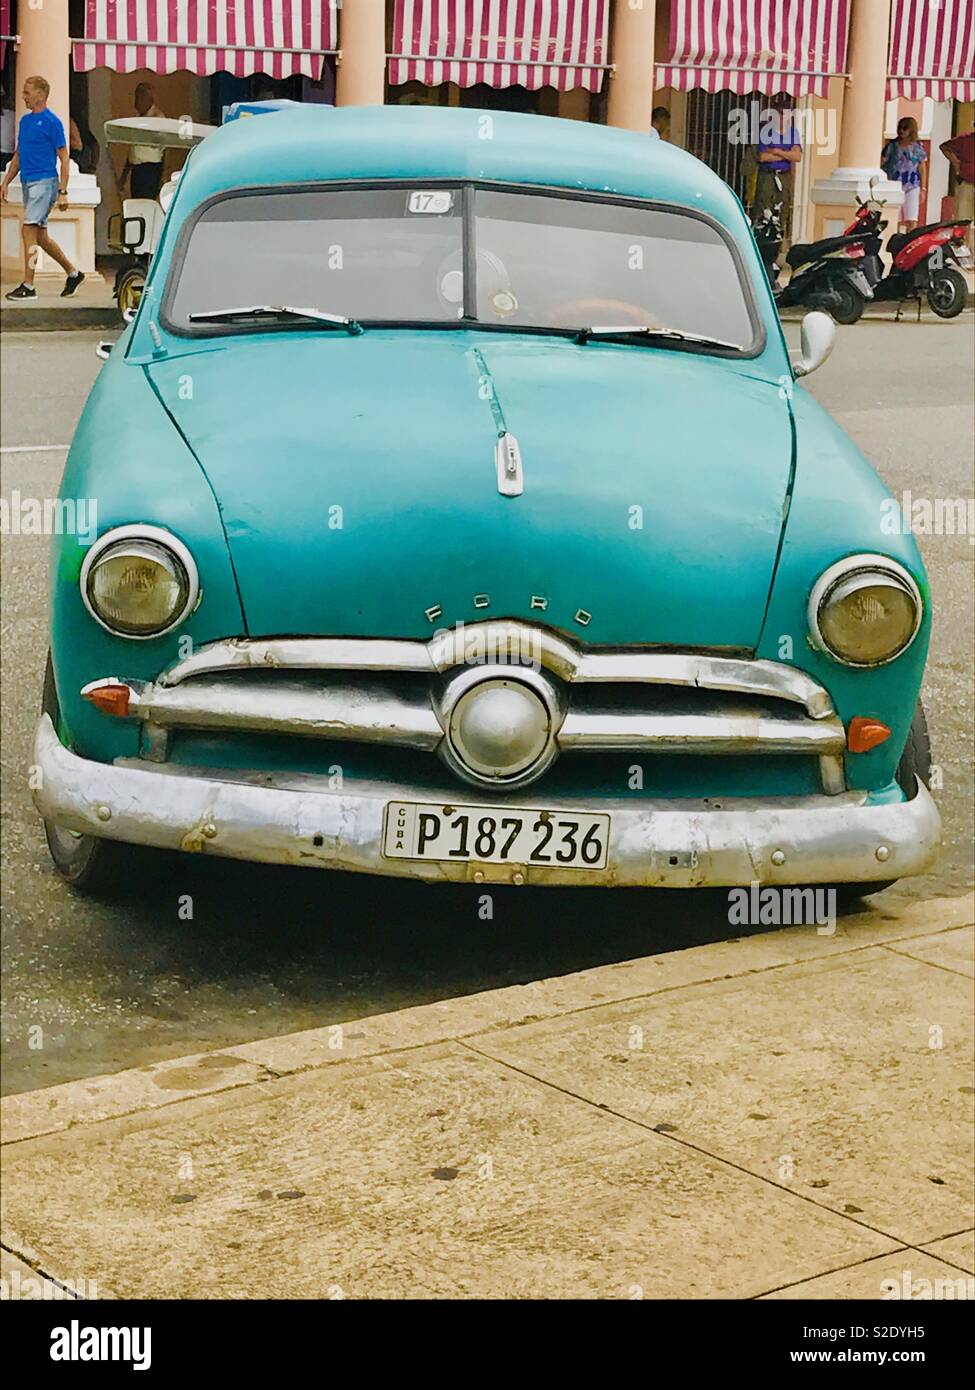 Old bright turquoise Ford classic car in Cienfuegos Cuba Stock Photo